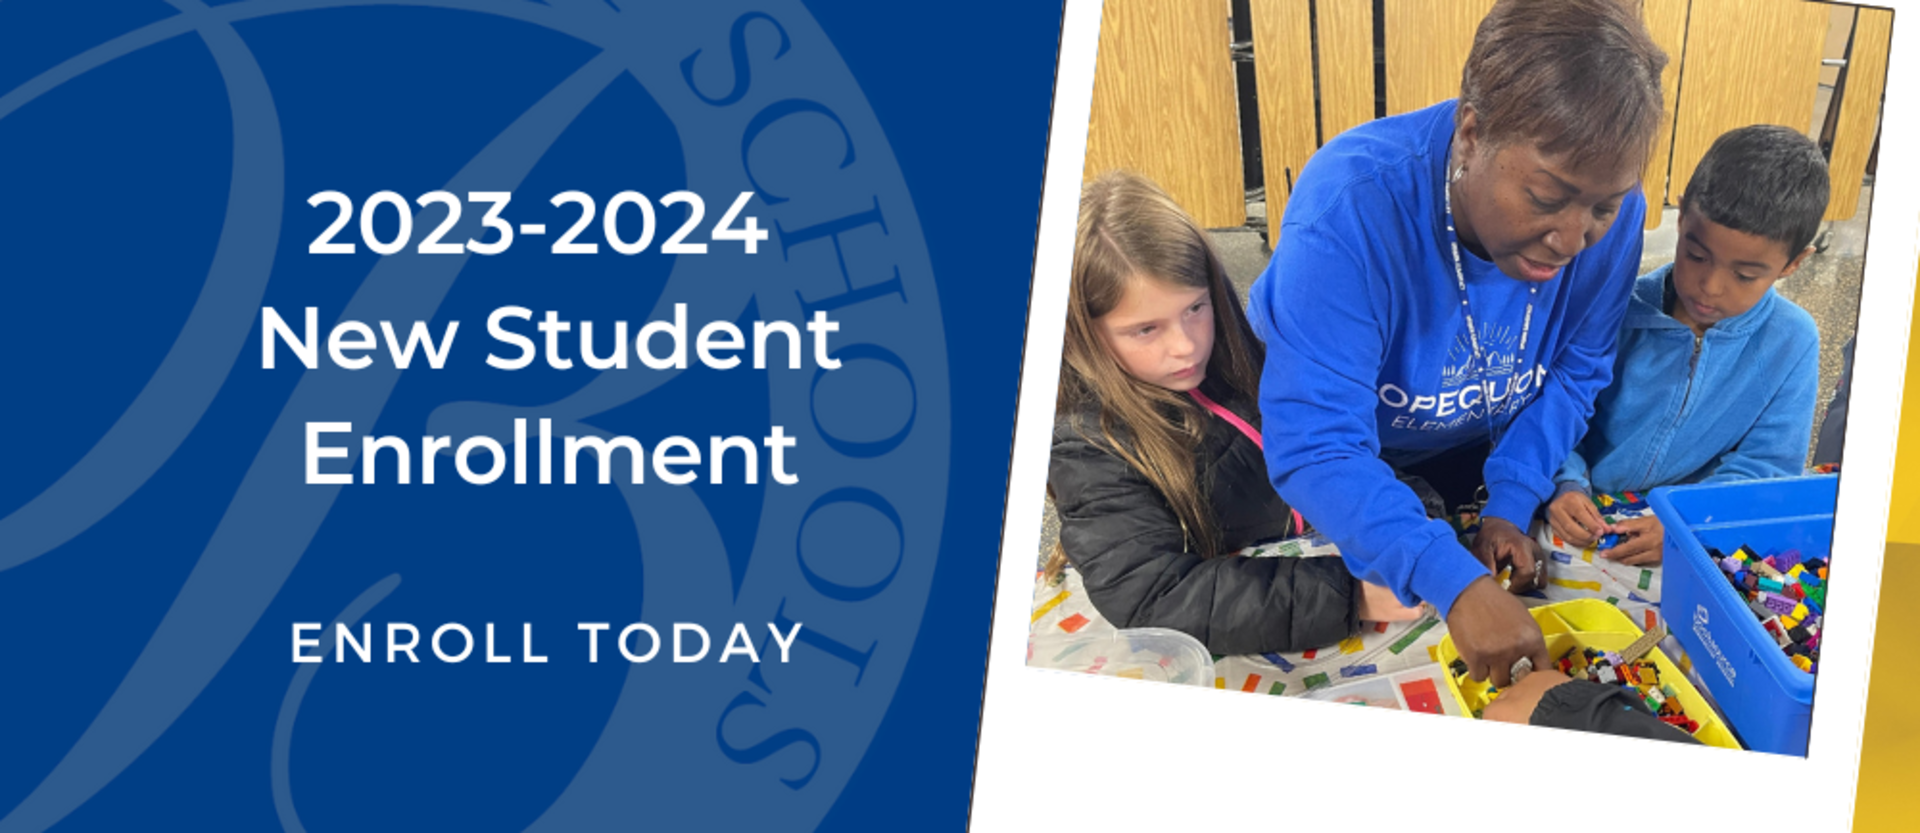 image of 2023-2024 new student enrollment with picture of teacher assisting students with an activity